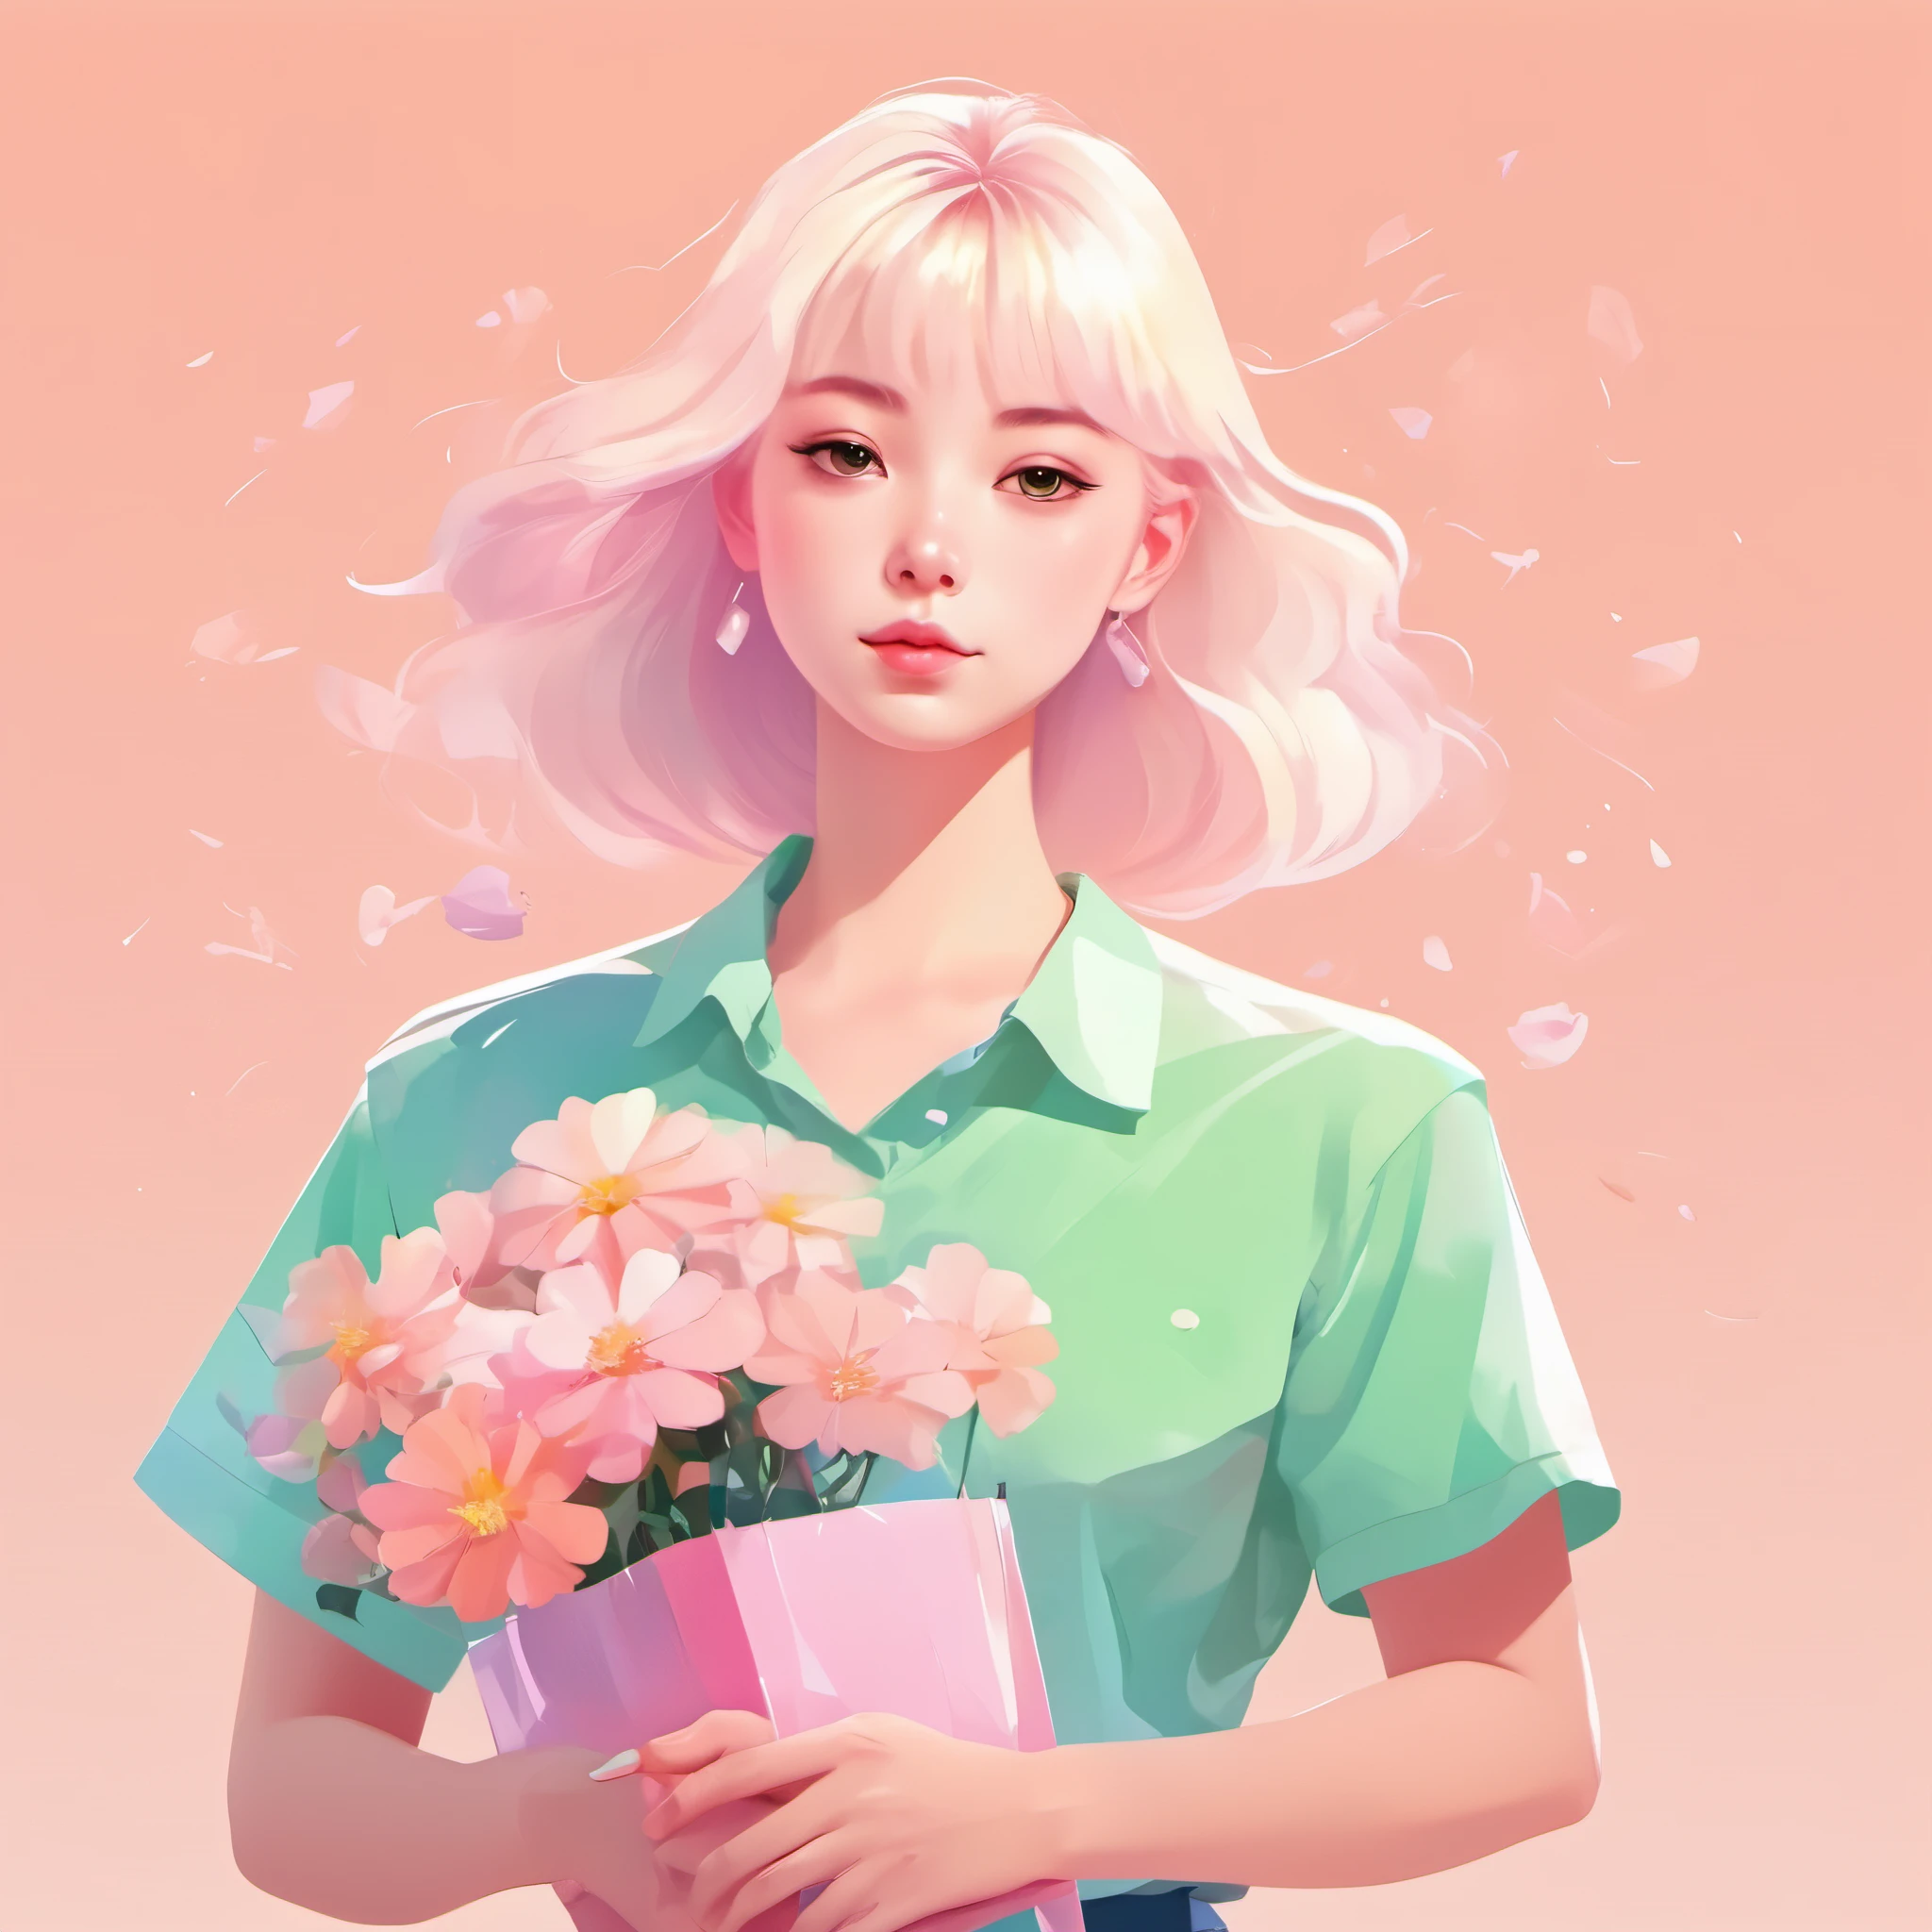 flat illustration，Minimalism，Geometry，abstract Memphis，anime portrait，close shot，holding a bouquet of flowers in hand，focus on face， wearing light green shirt，Short pink skirt，Holding flowers in hand，Light pink canvas bag on shoulder，Long platinum blonde hair，Lane Blue Background，style expression，celluloid